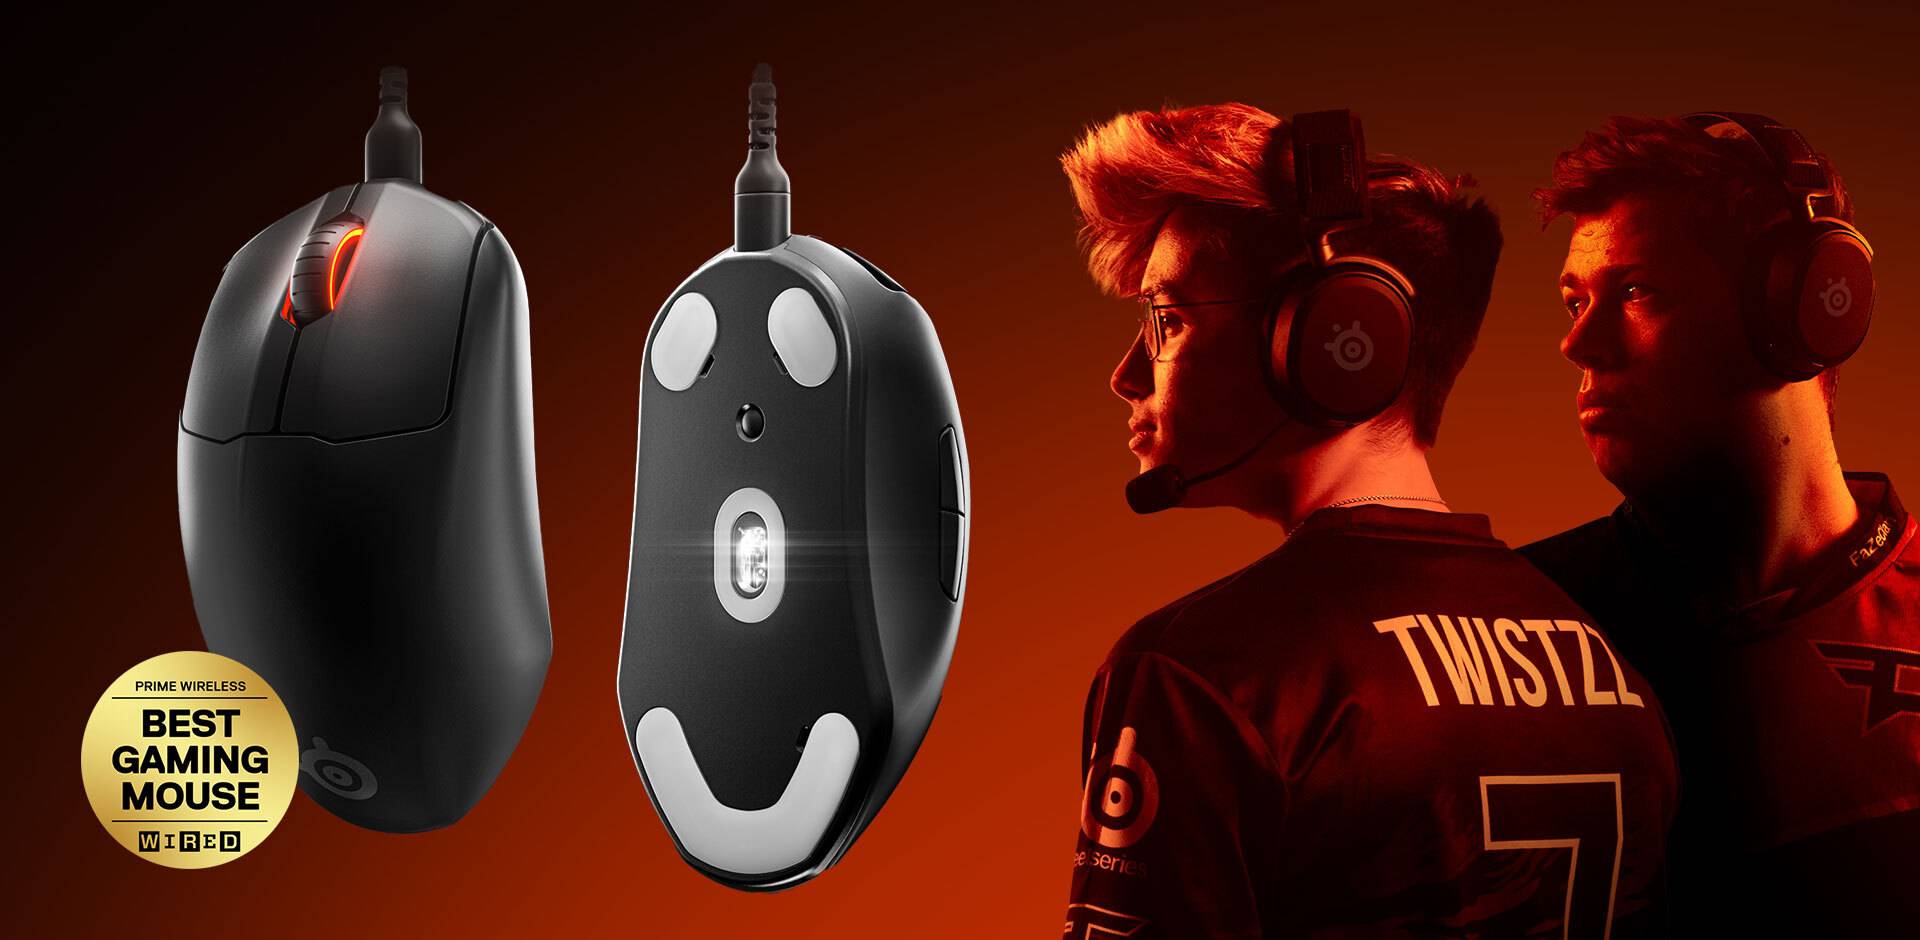 Train your aim with SteelSeries and win a gaming mouse or headset